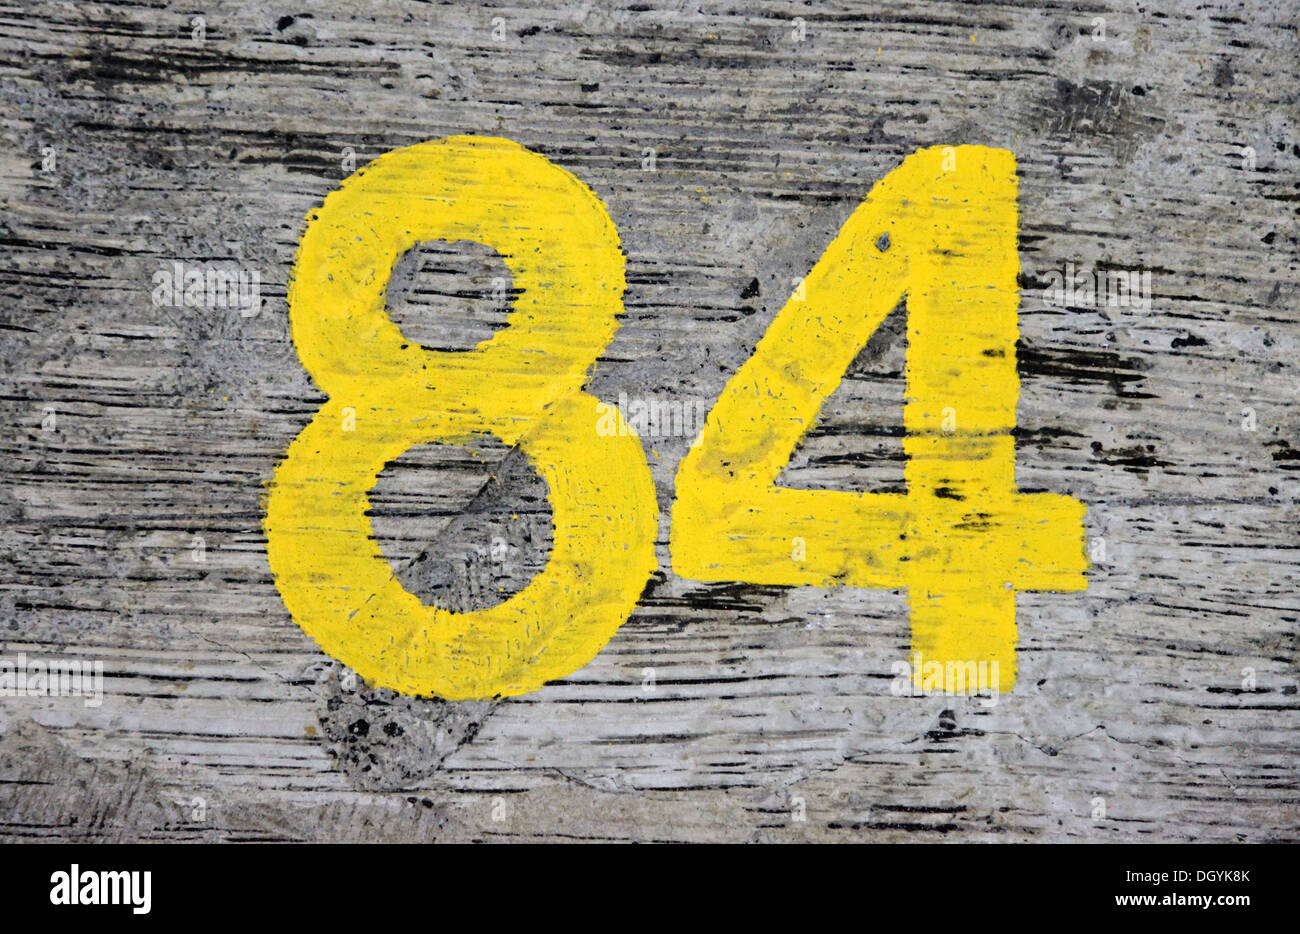 it-s-a-photo-of-the-number-84-eighty-four-that-is-painted-on-the-stock